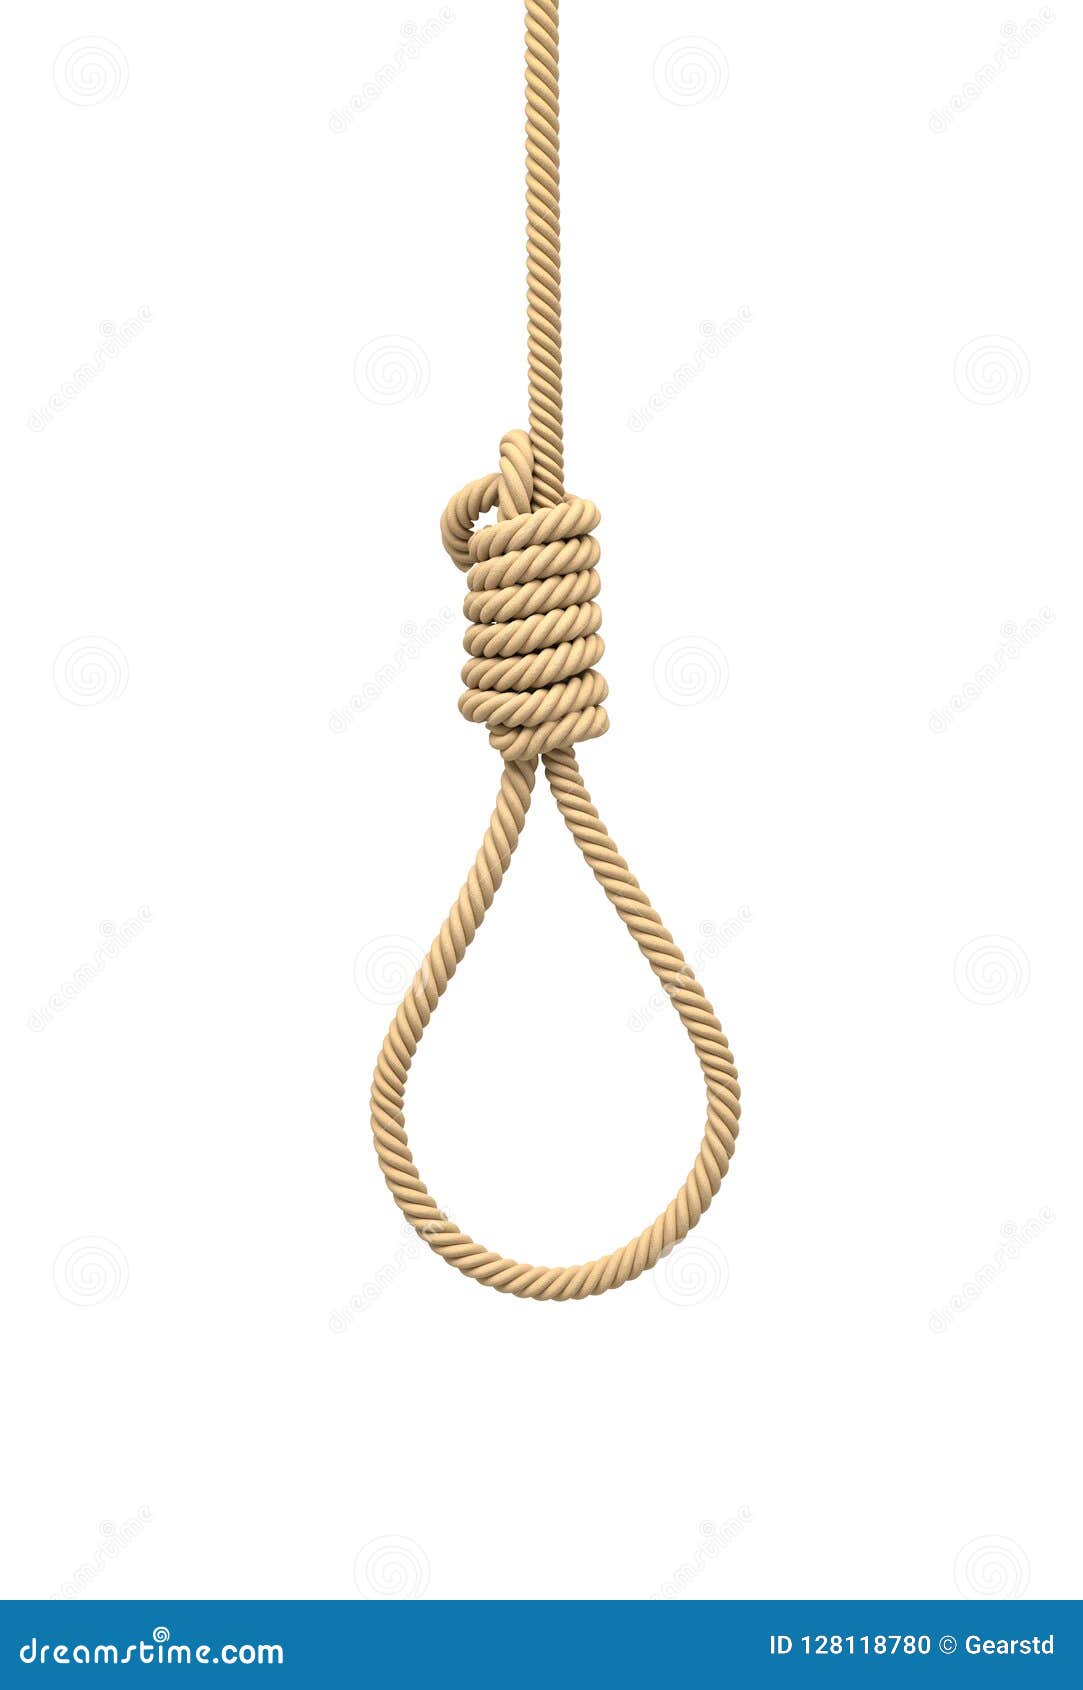 3d rendering of a hangman`s noose made of natural beige rope hanging on a white background.